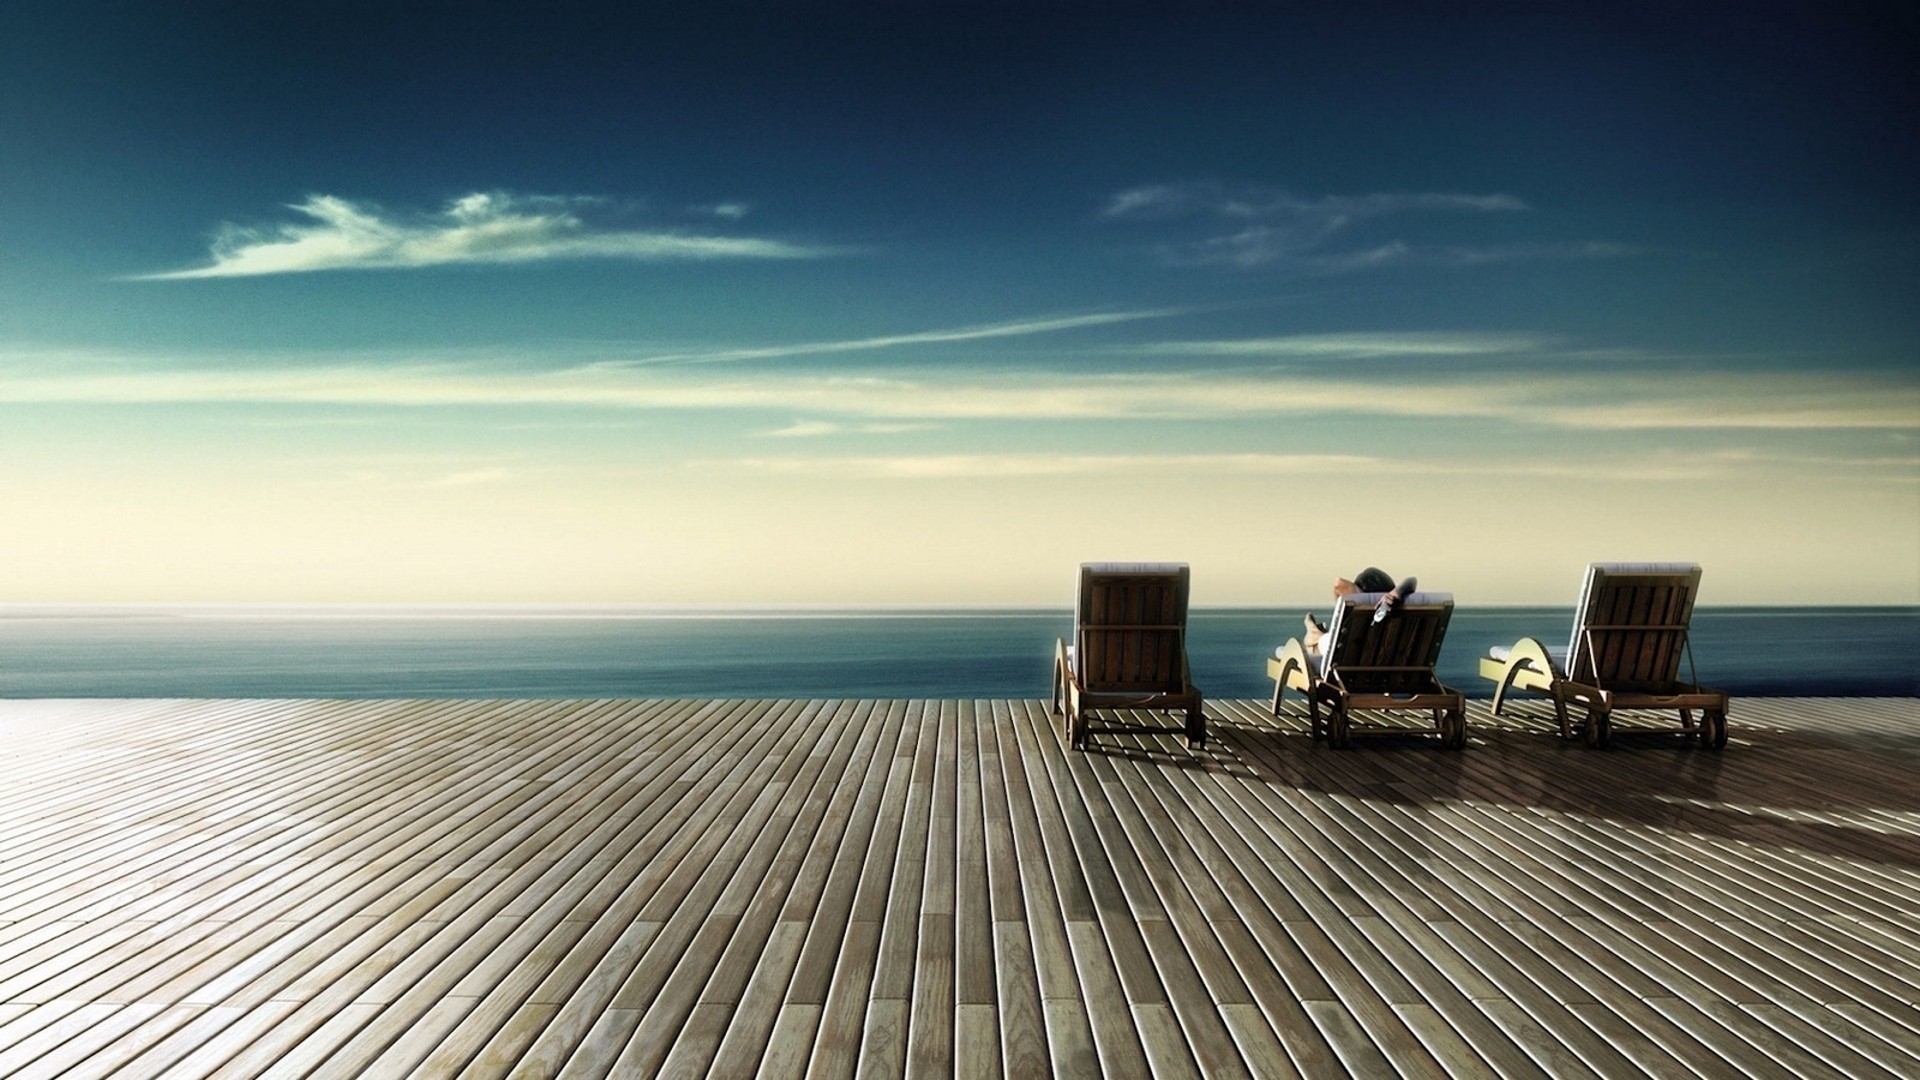 General 1920x1080 deck chairs aerial view stairs clouds sky alone landscape outdoors